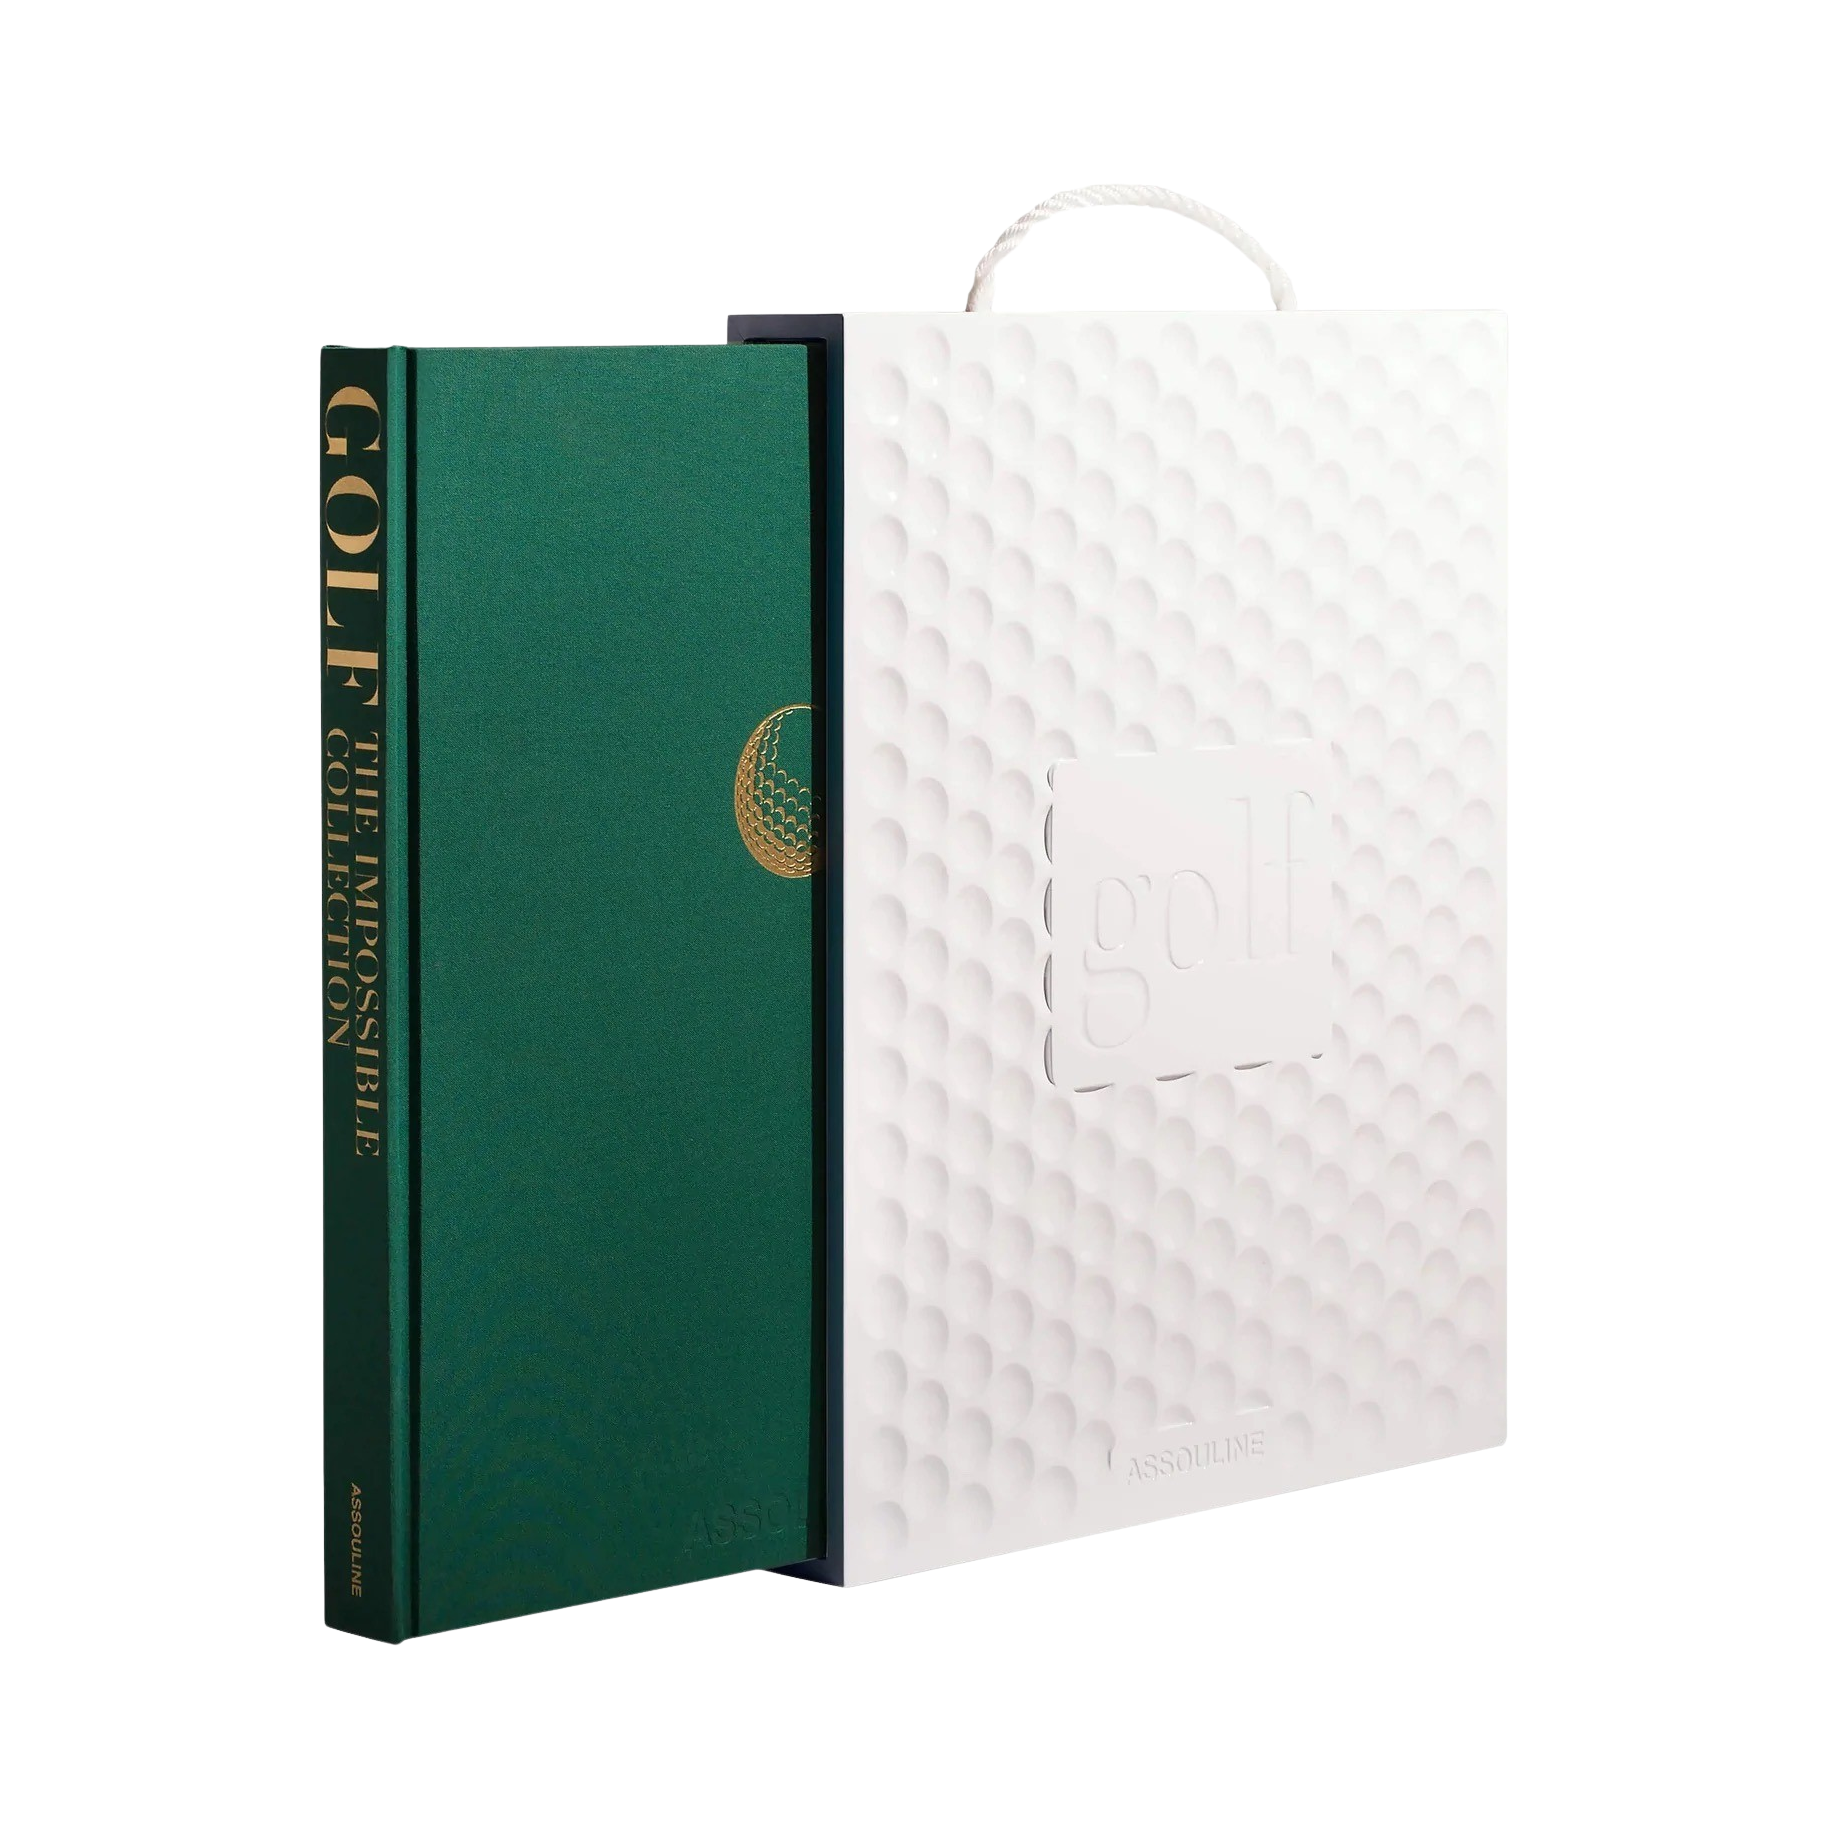 83143 Assouline Golf: The impossible Collection Book